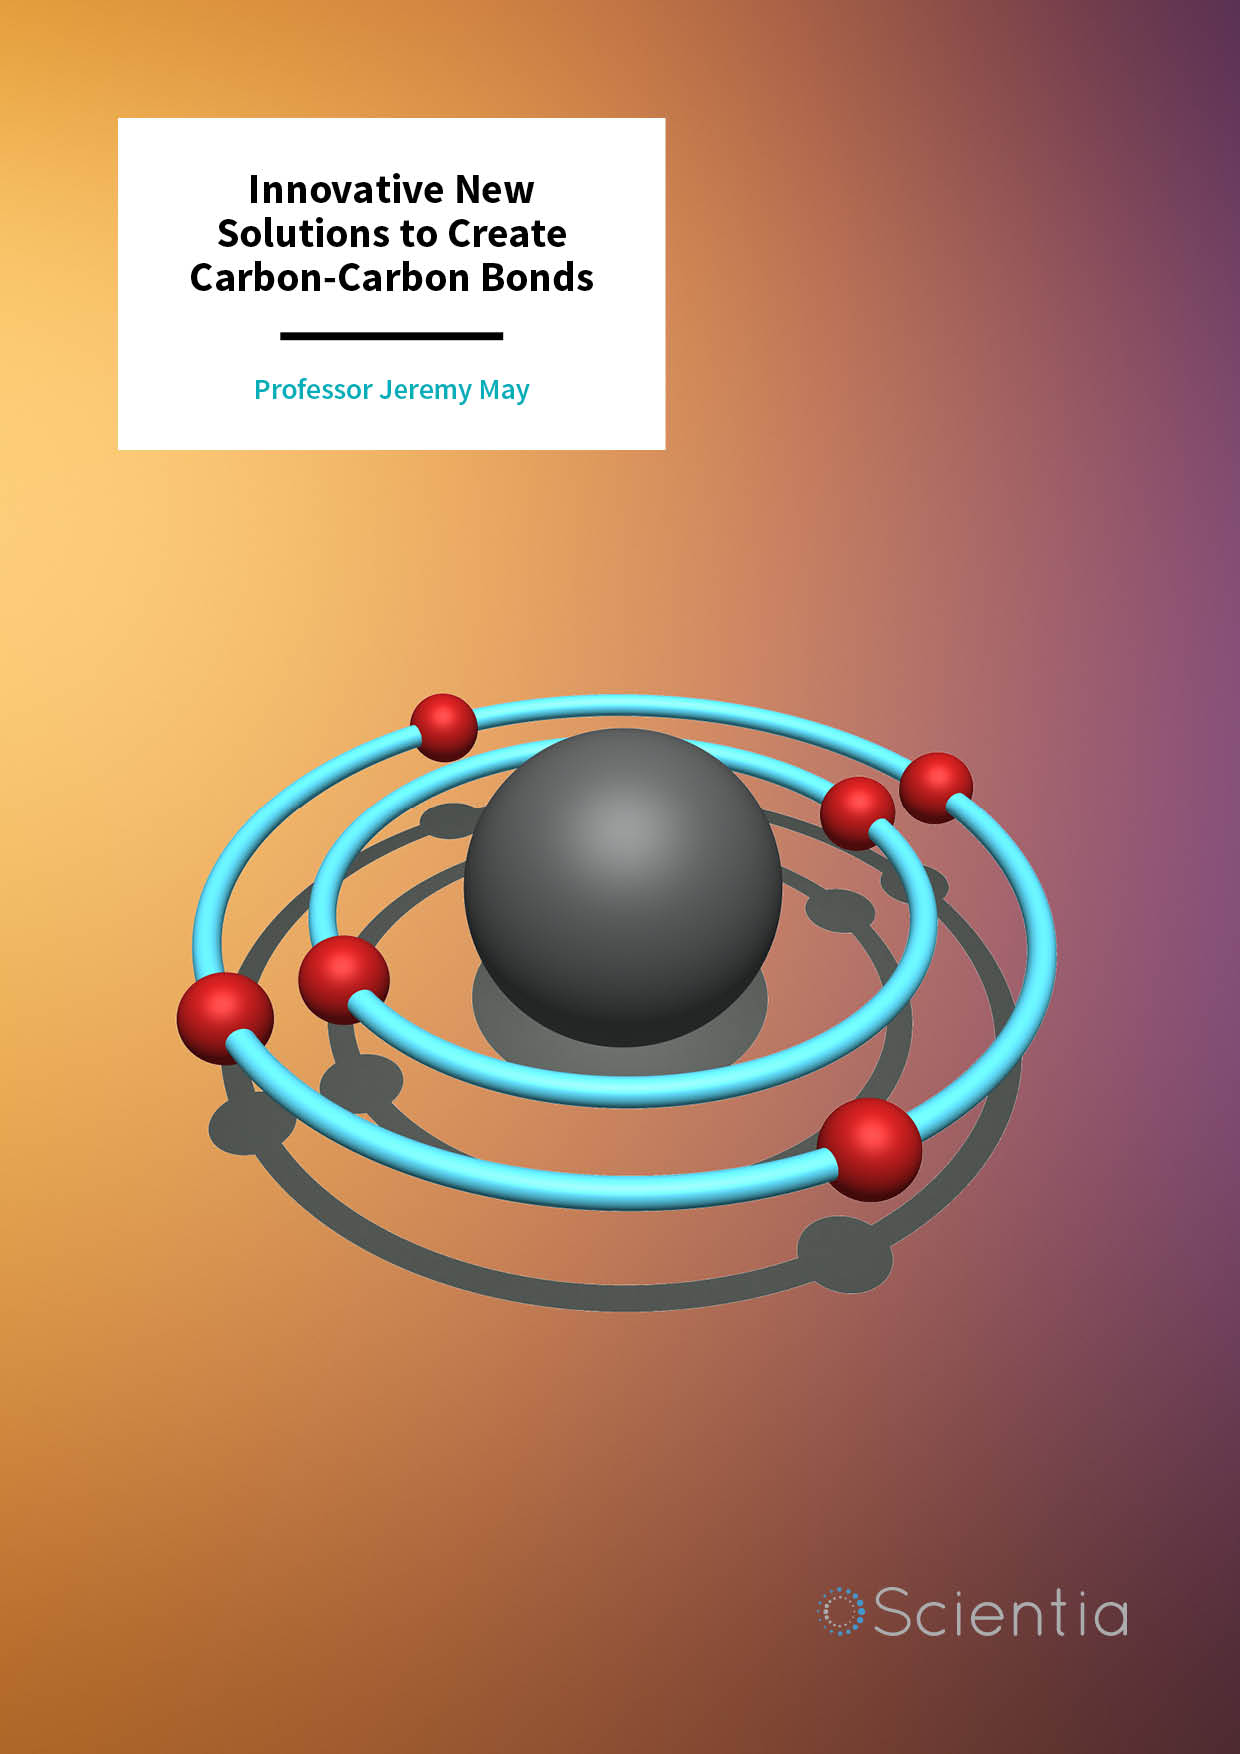 Professor Jeremy May | Innovative New Solutions to Create Carbon-Carbon Bonds